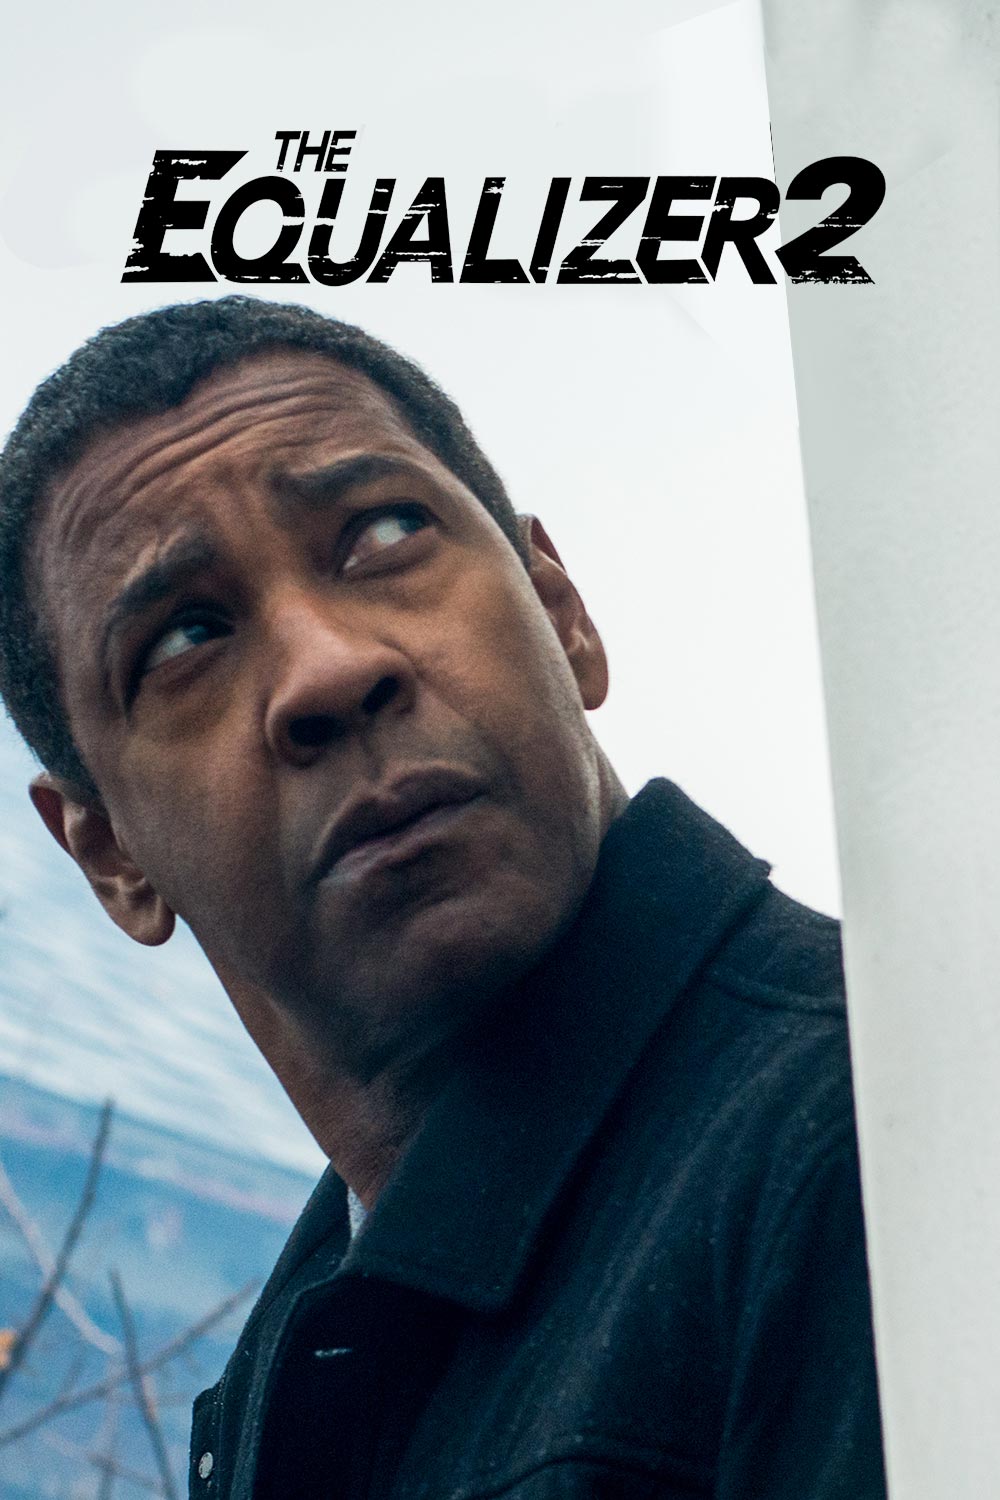 Pygmalion Peep Barry Watch The Equalizer 2 Movie Online | Buy Rent The Equalizer 2 On BMS Stream